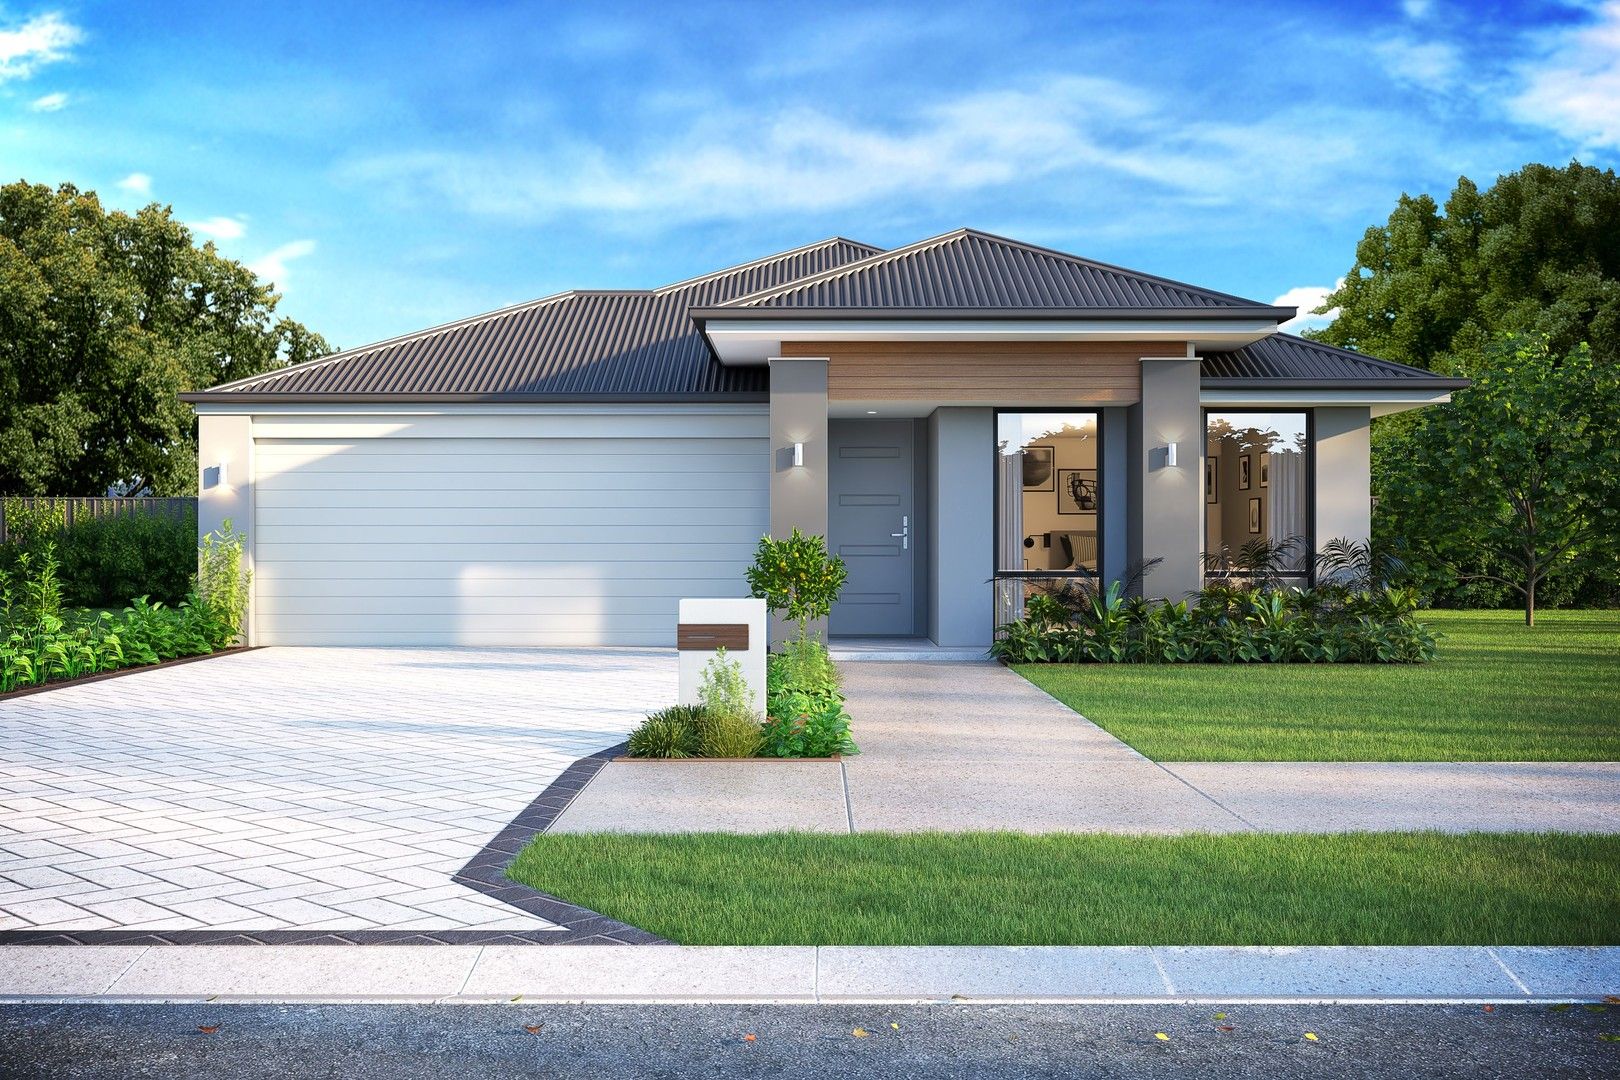 4 bedrooms New House & Land in 2223 Relaxation Loop YANCHEP WA, 6035